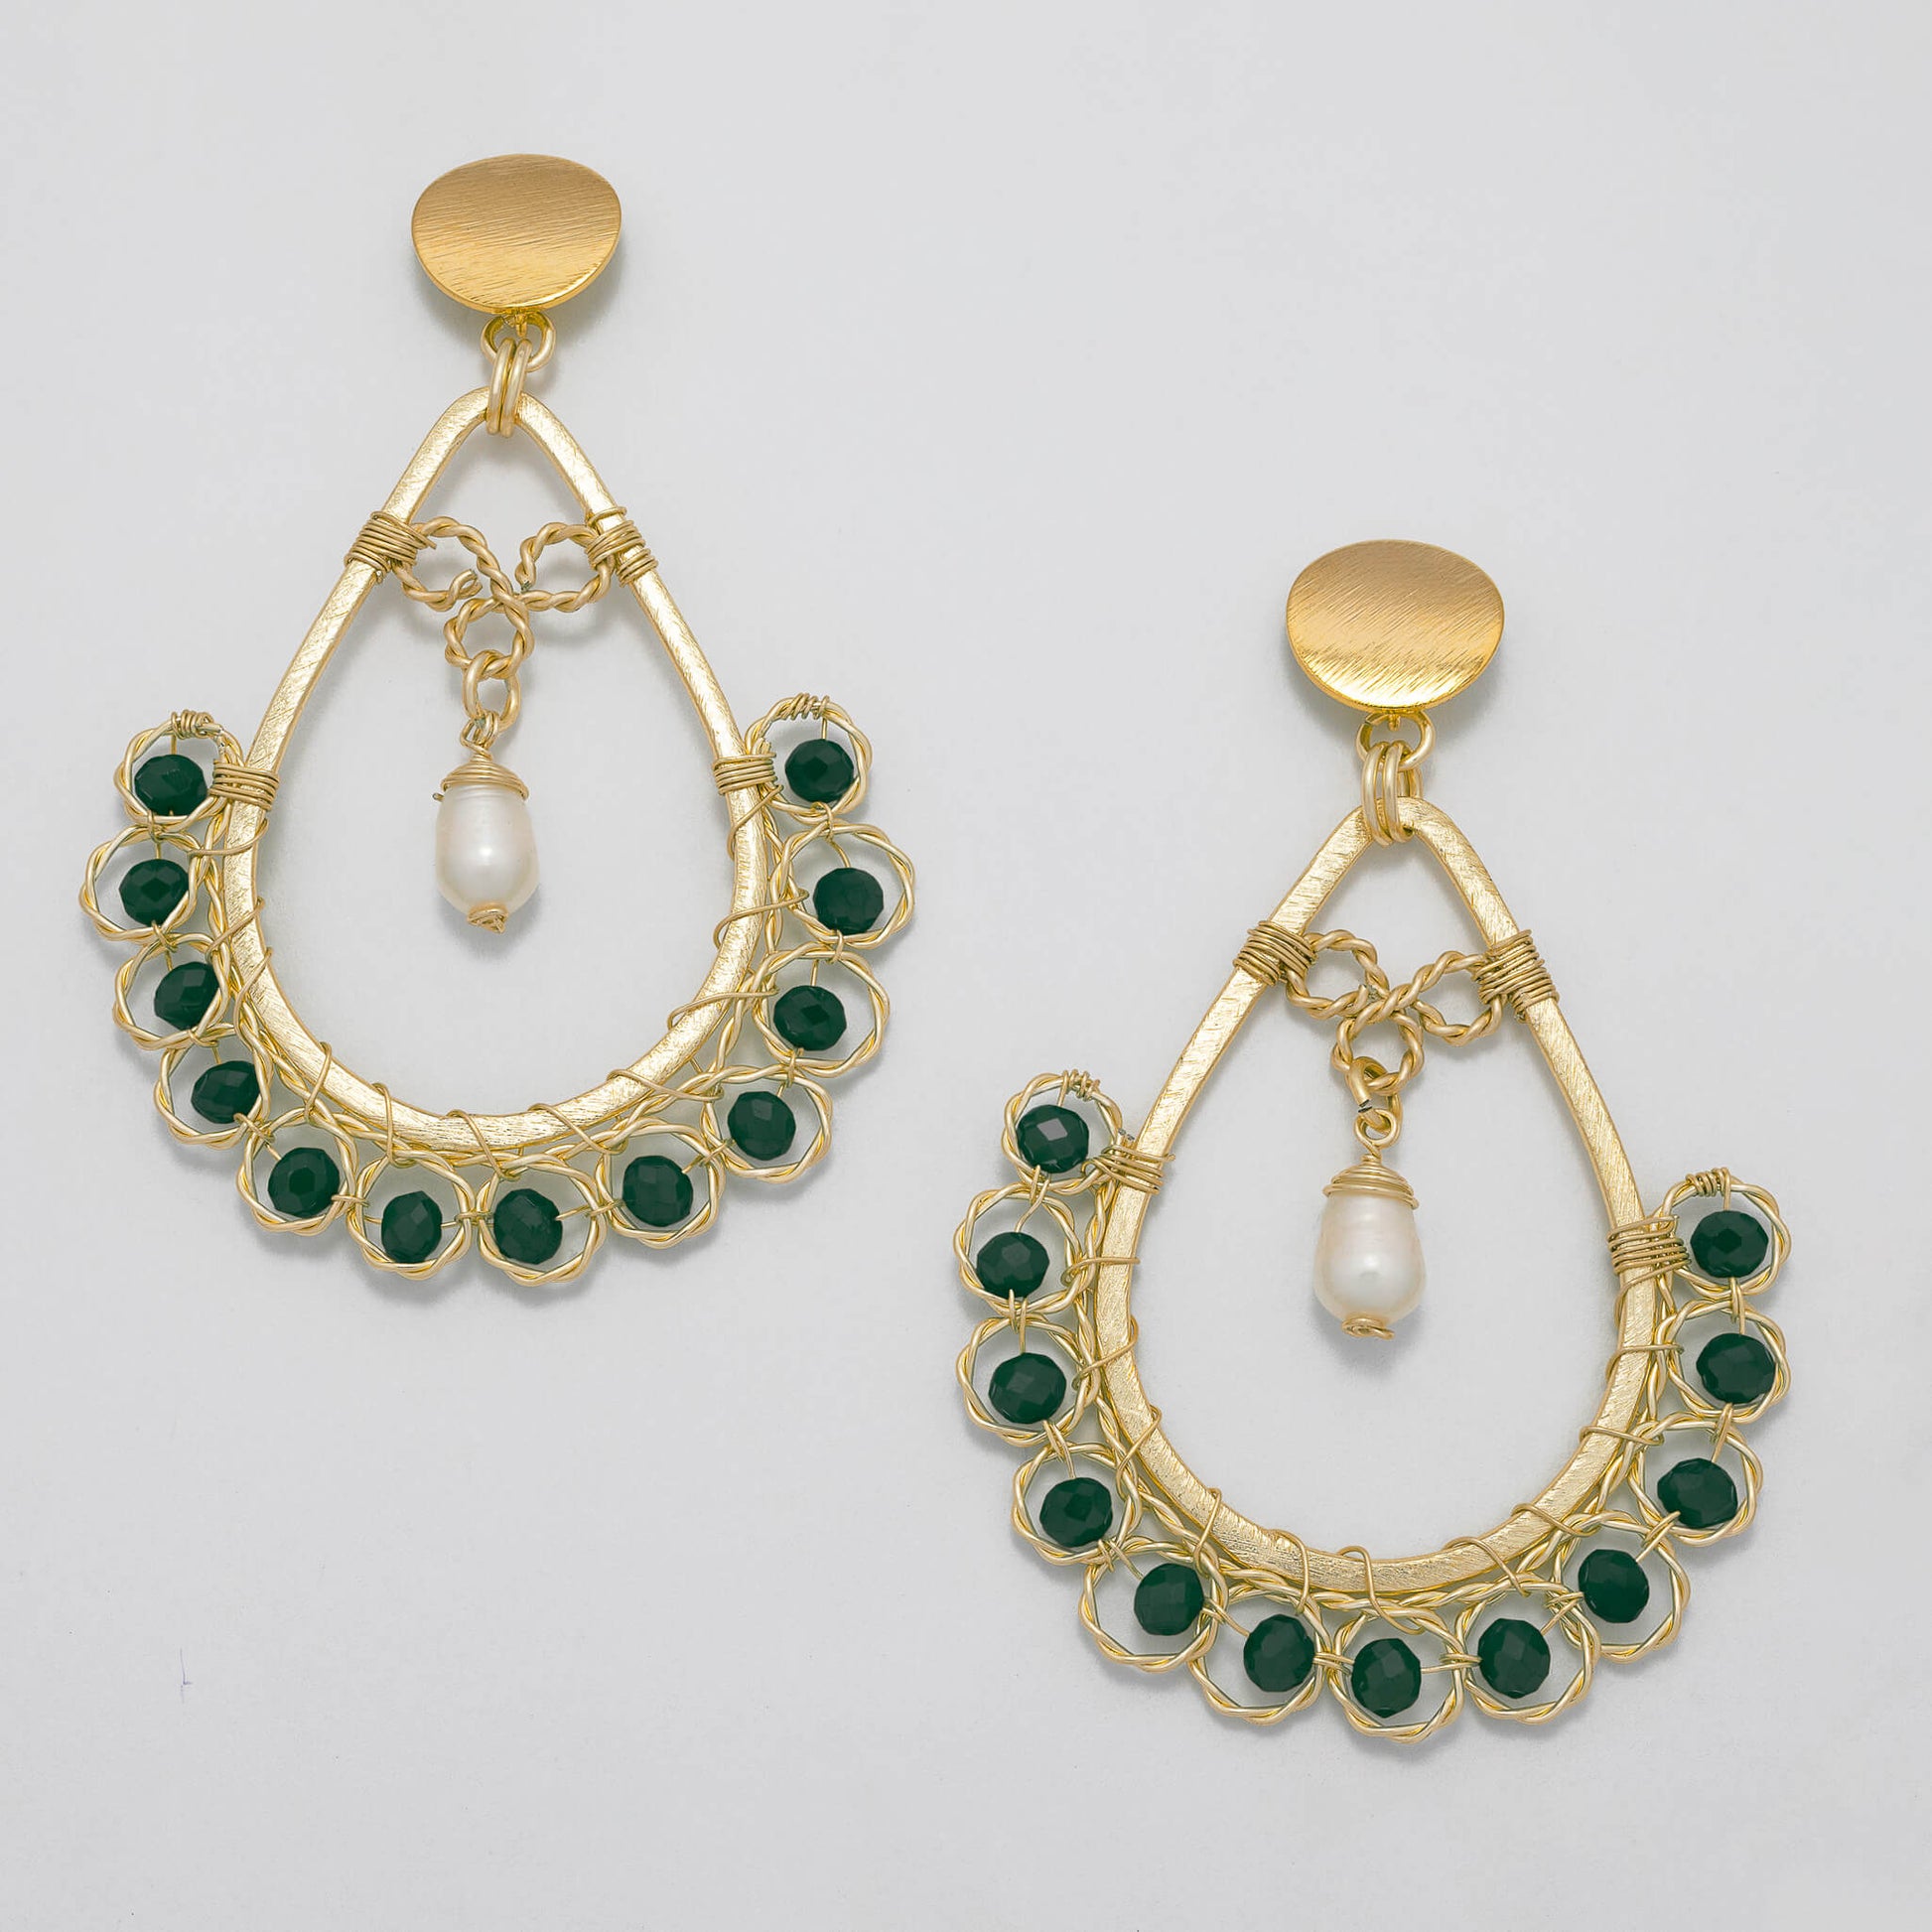 Amara I Earrings are 3 inches long. Gold teardrop Earrings. Gold, Dark Green, and White earrings. Handmade with Faceted Crystal beads and freshwater pearls. Wire Wrapped Earrings.